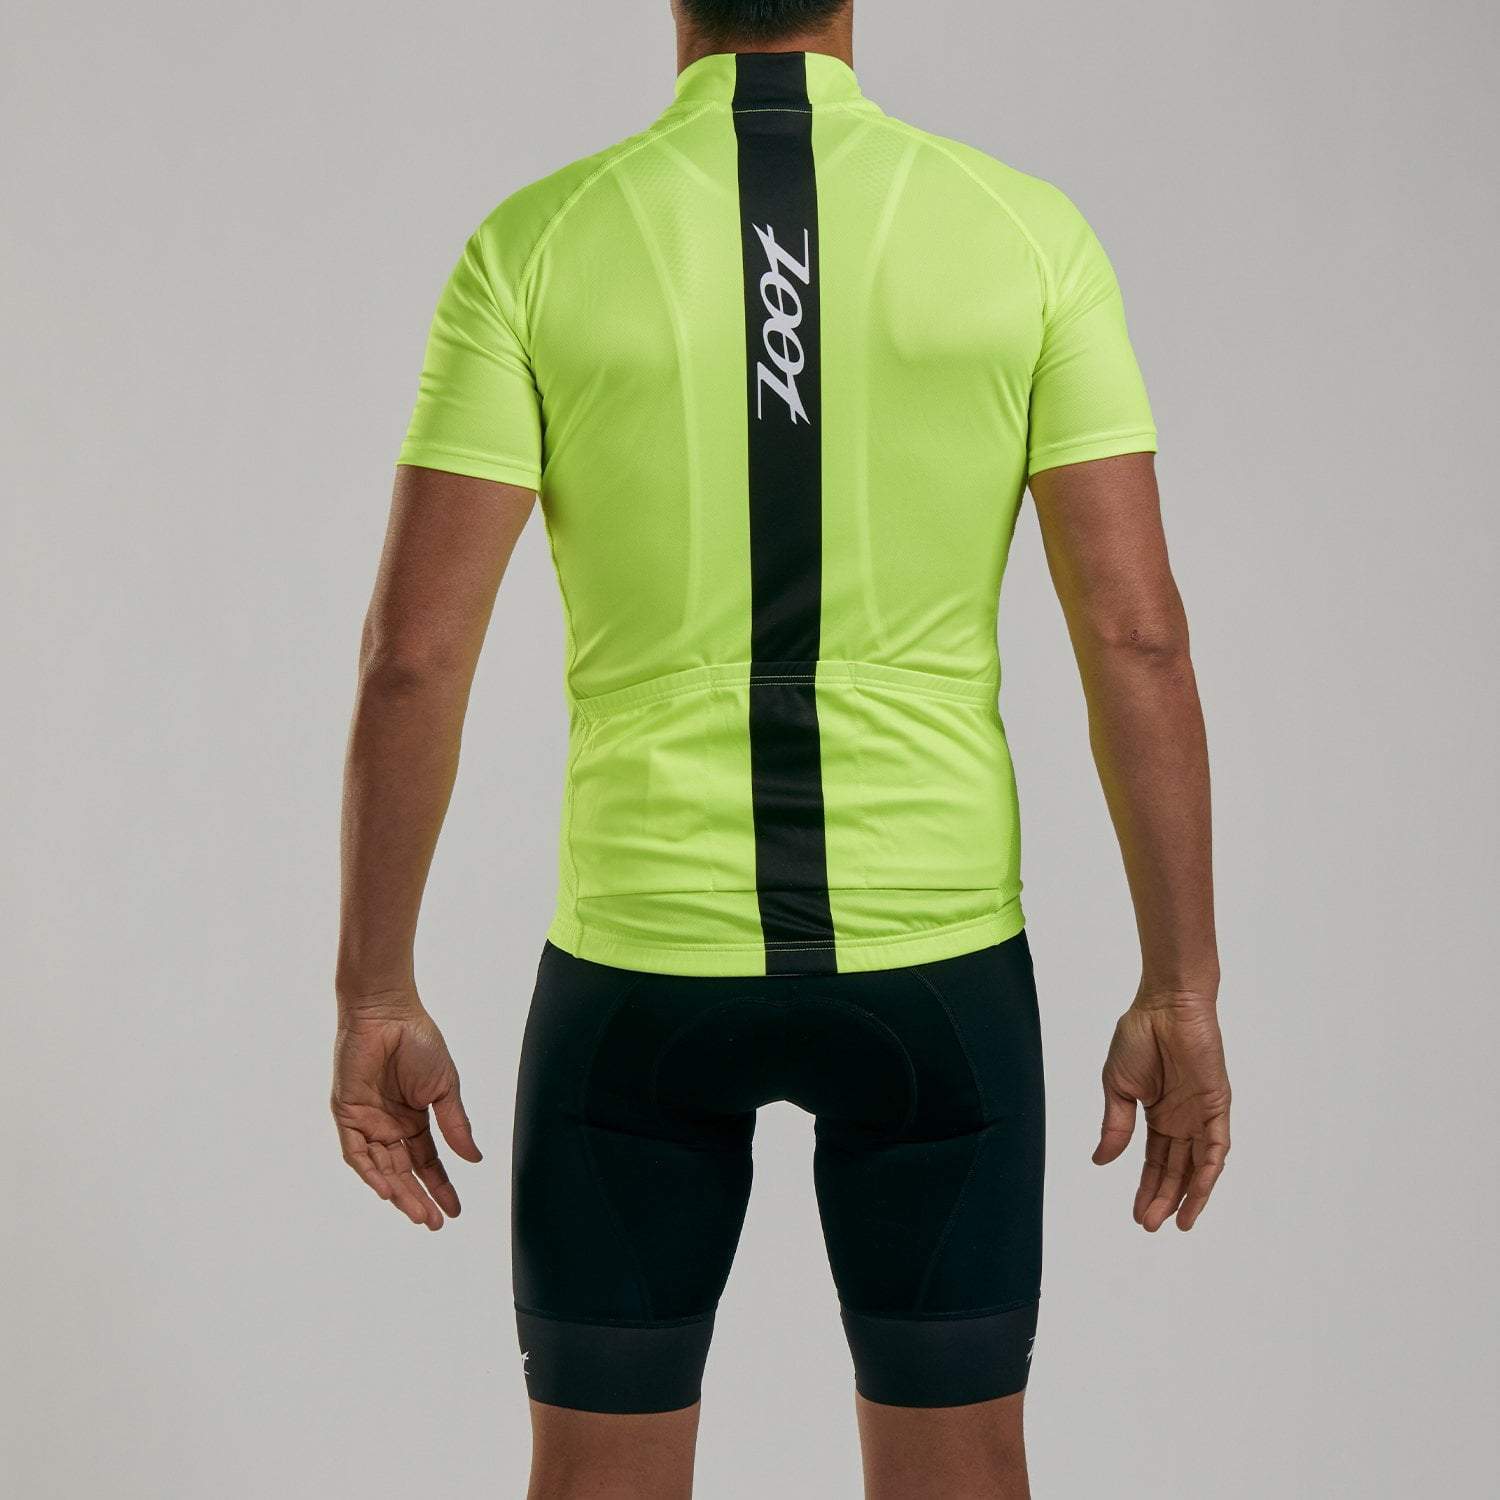 Mens Core+ Cycle Jersey - Safety Yellow